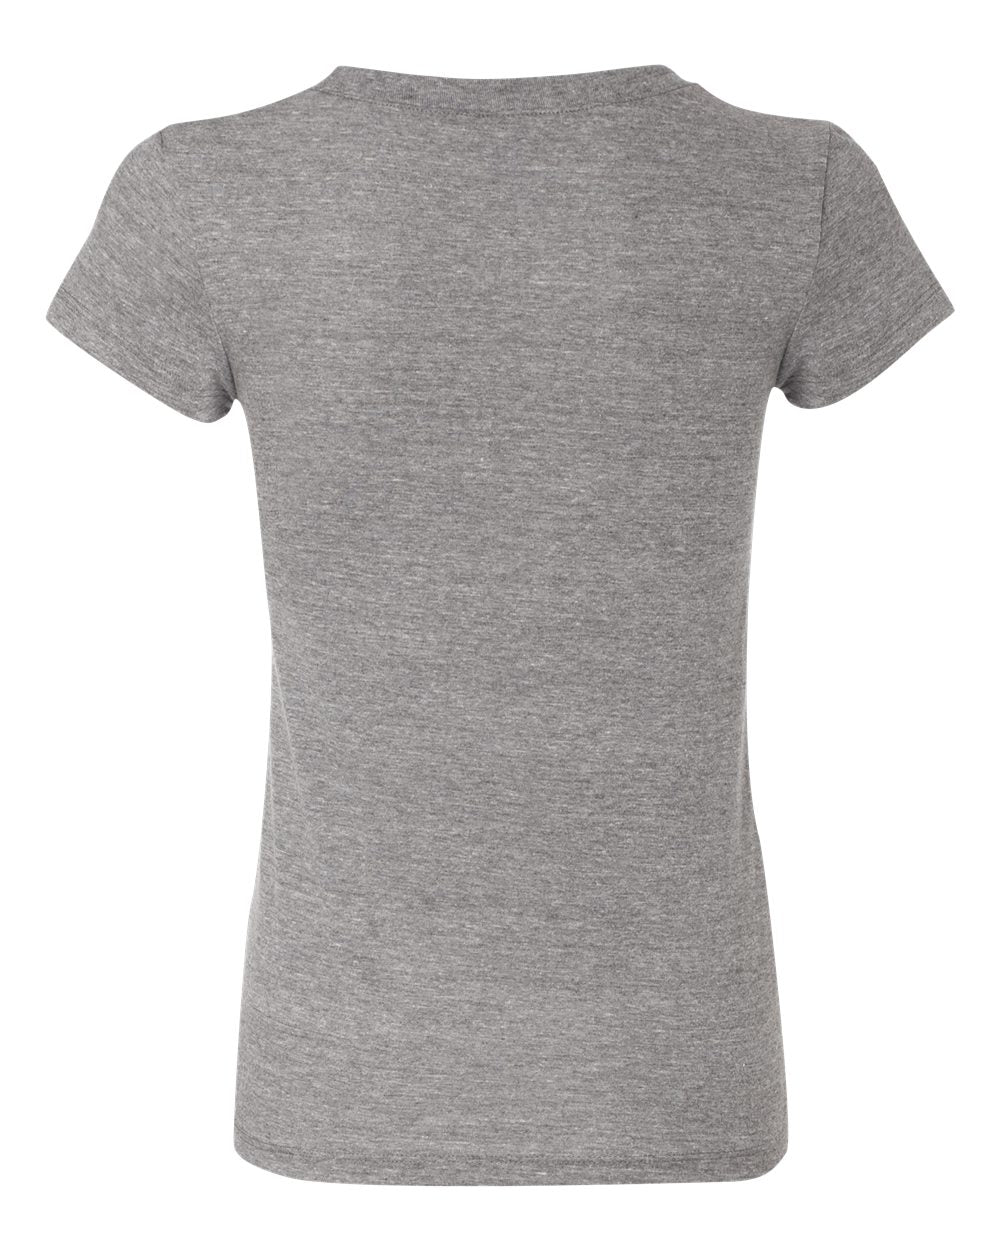 BELLA + CANVAS Women's Triblend Tee 8413 #color_Grey Triblend